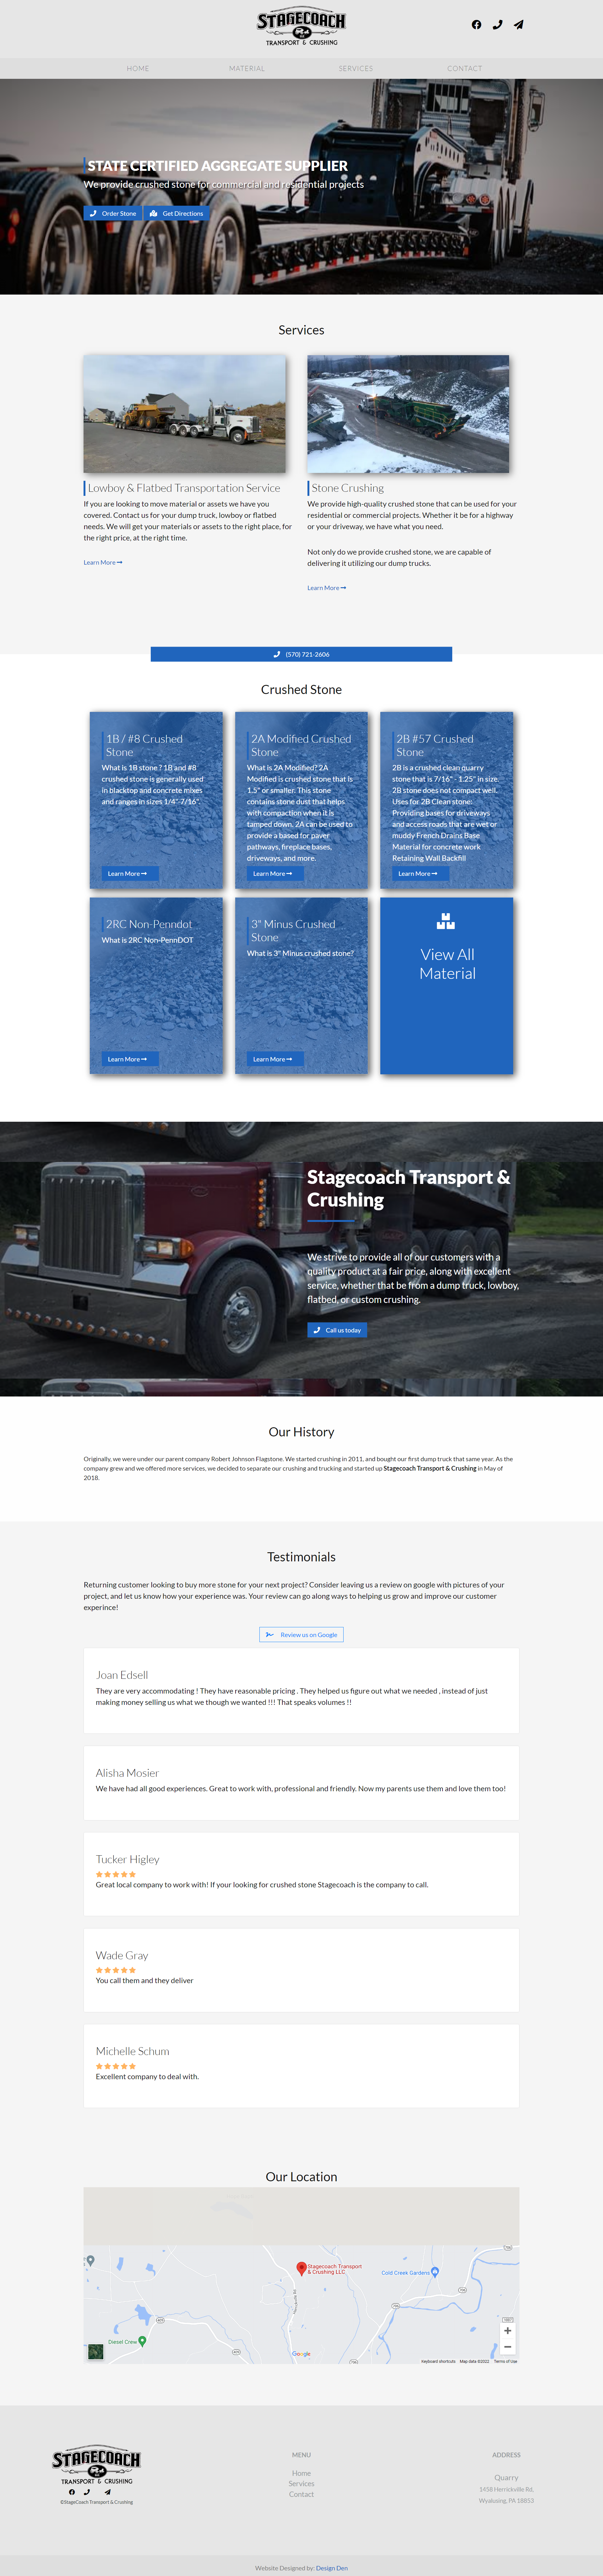 Full page screenshot of Stagecoach Transport & Crushing website 